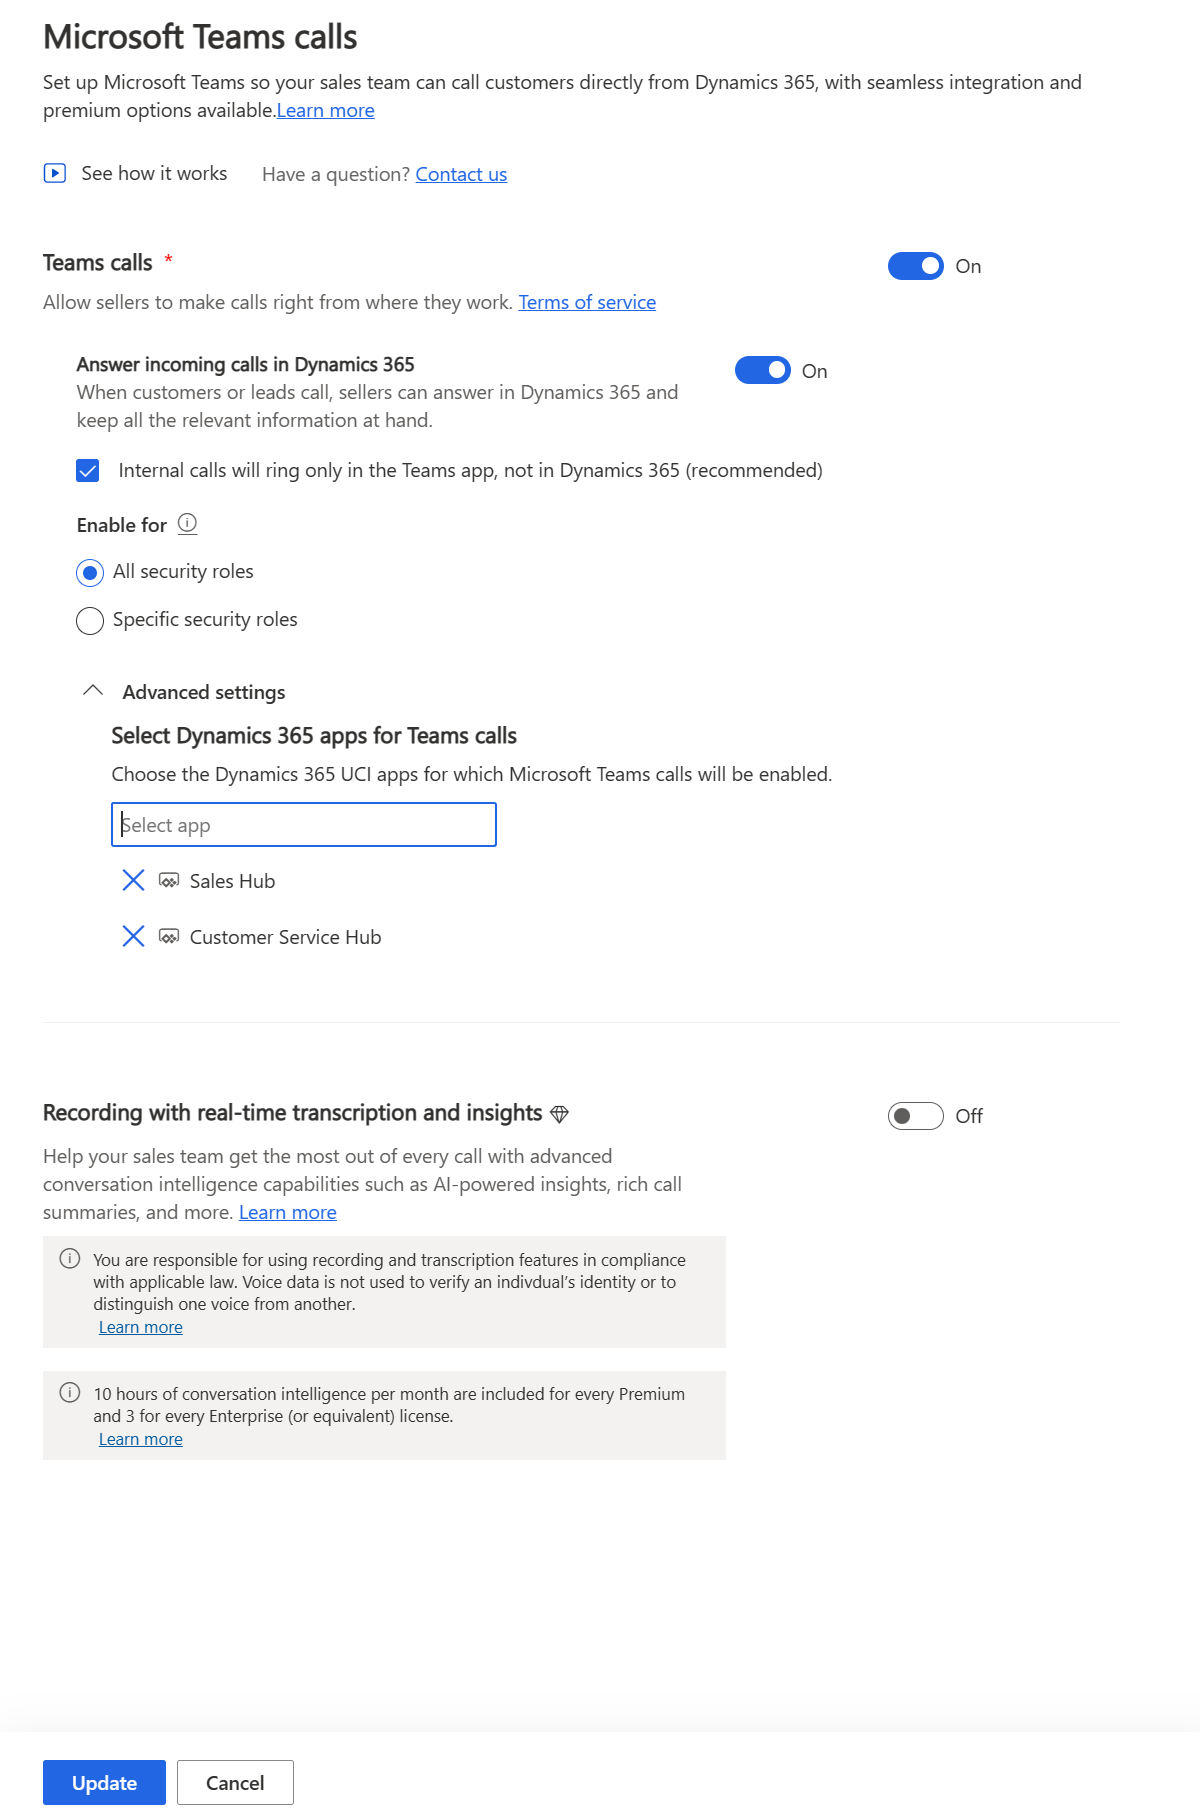 Screenshot that shows how to remove a custom app from the Advanced settings on the Microsoft Teams calls page.